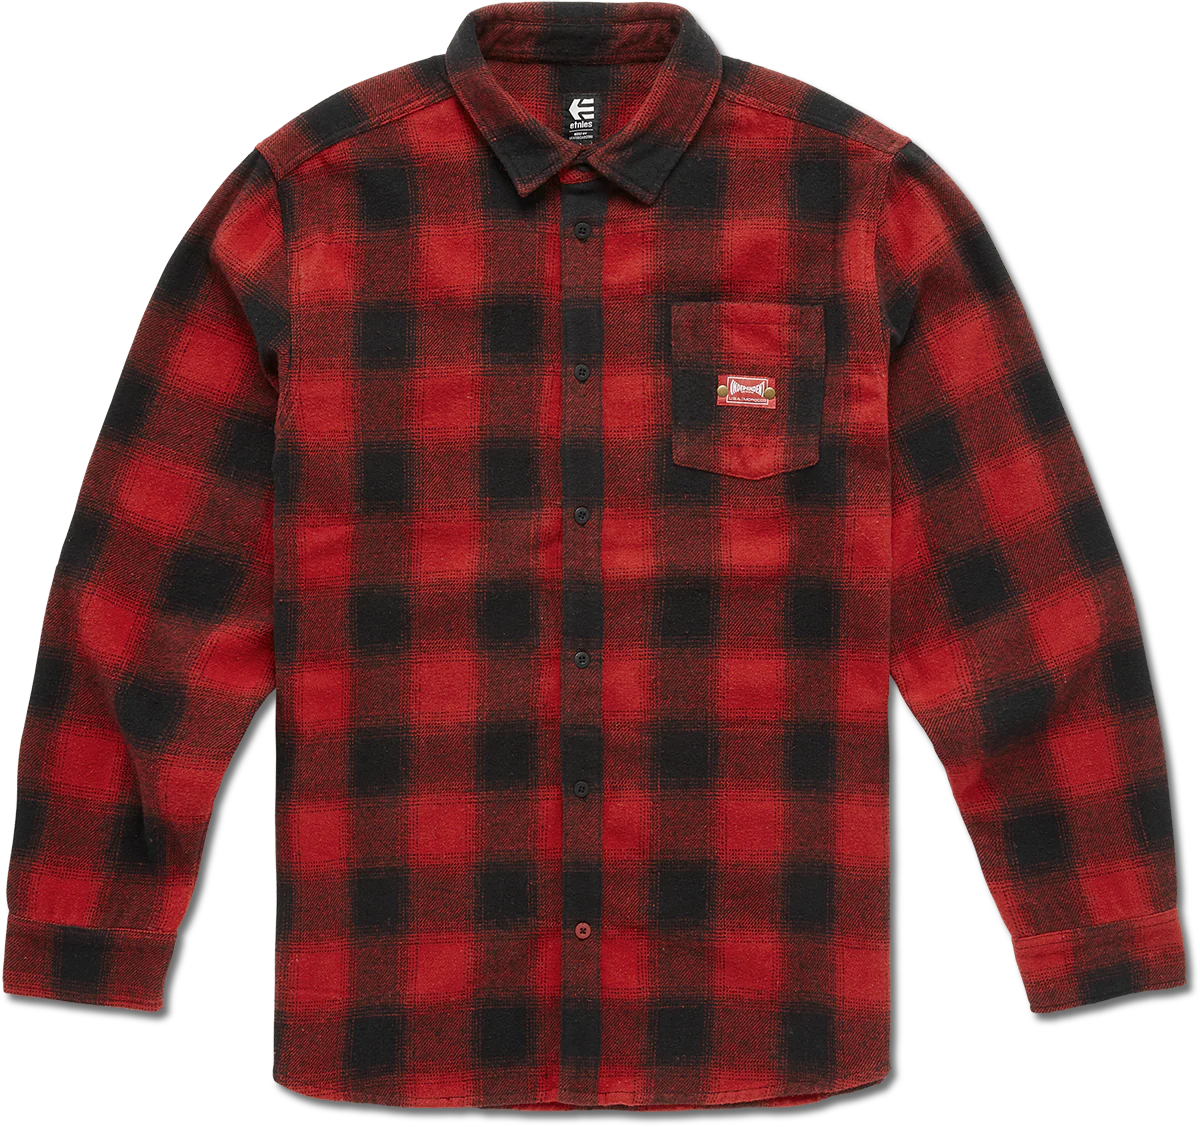 Etnies X Indy Flannel - Red